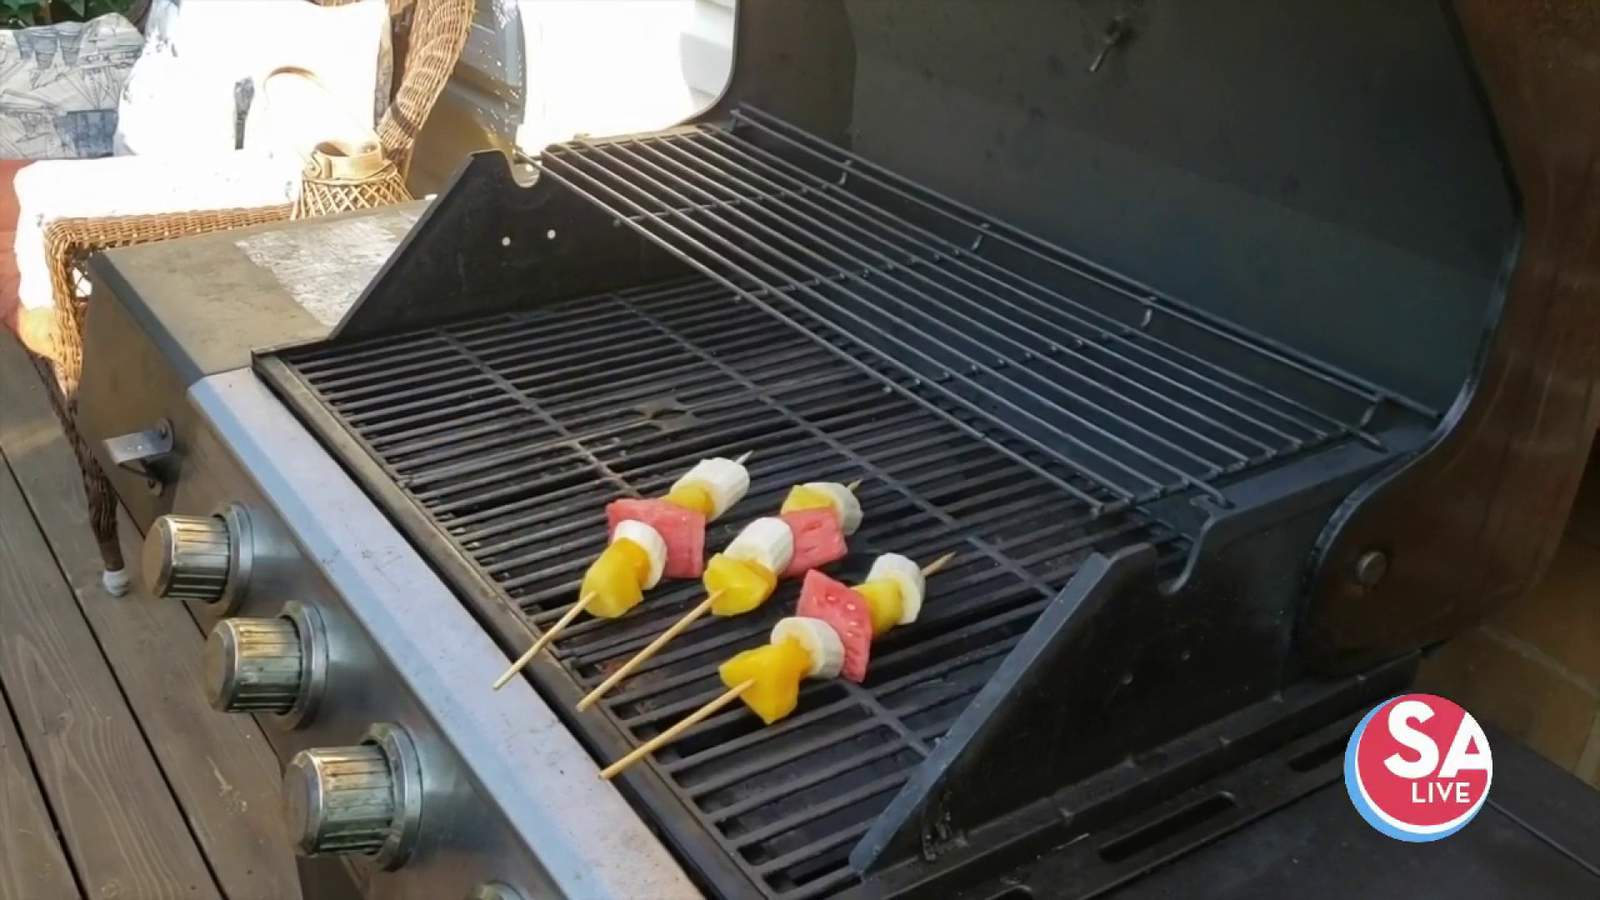 Everyone loves a good dessert, but have you tried grilling your sweets?